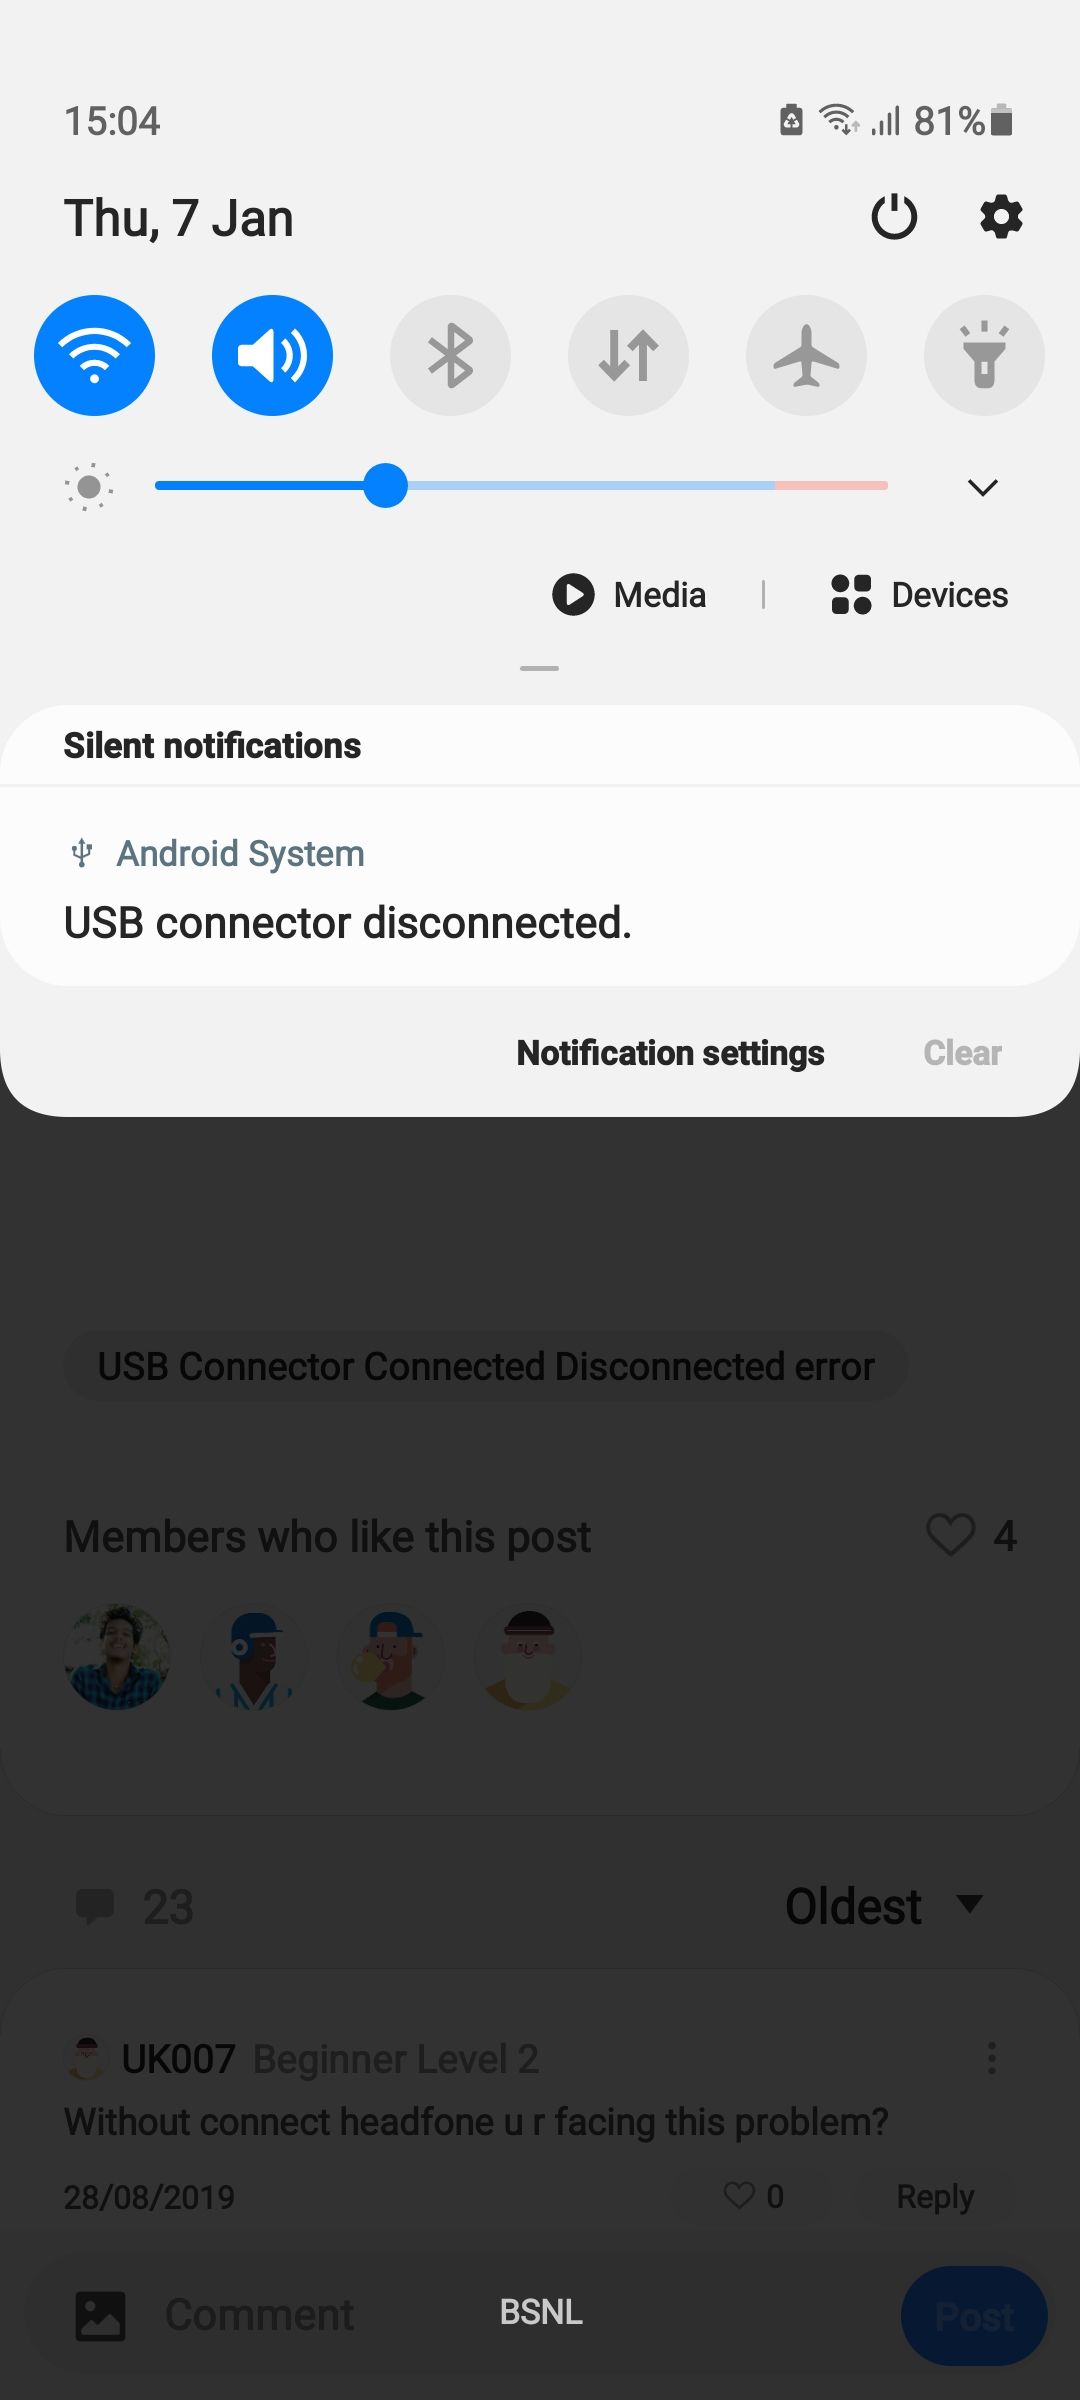 USB Connector Connected/Disconnected error - Samsung Members